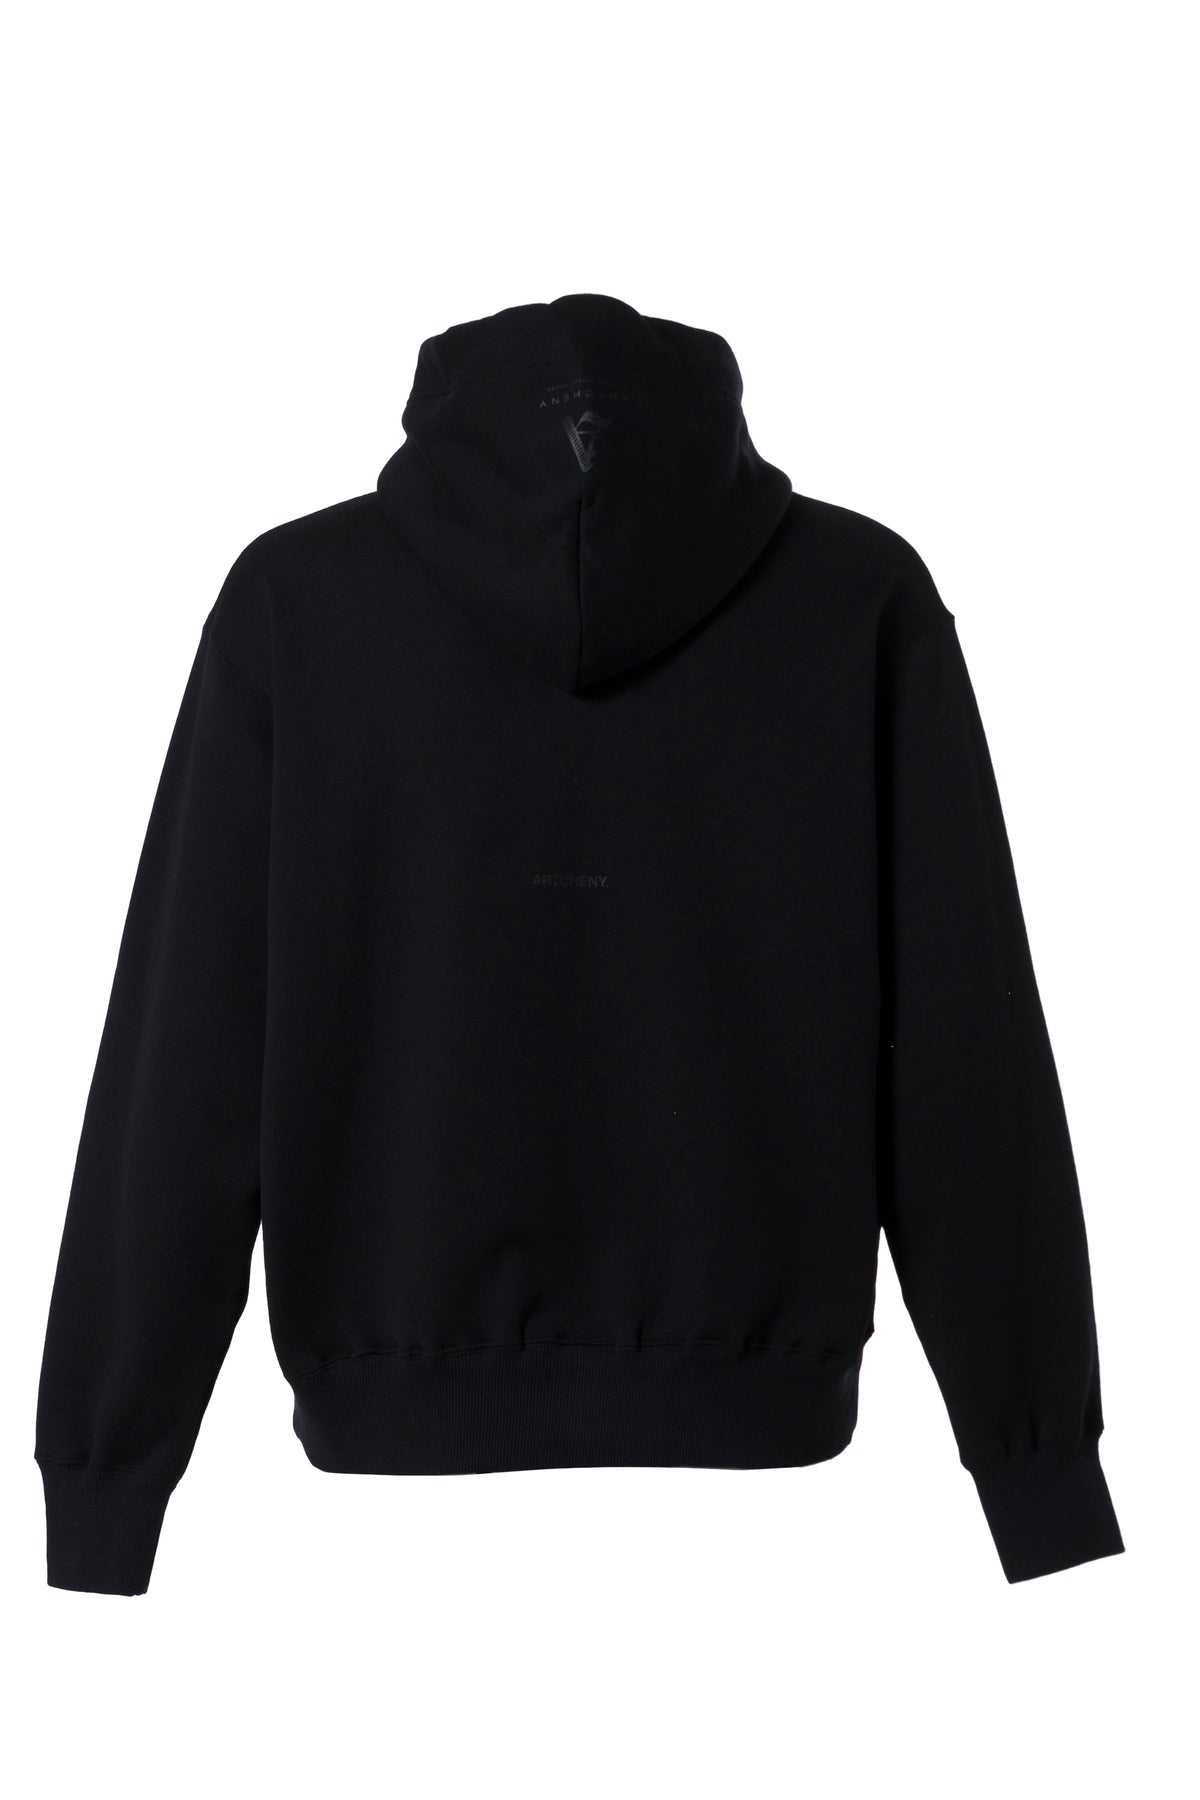 ARTCHENY HOODIE BUTTERFLY / BLK